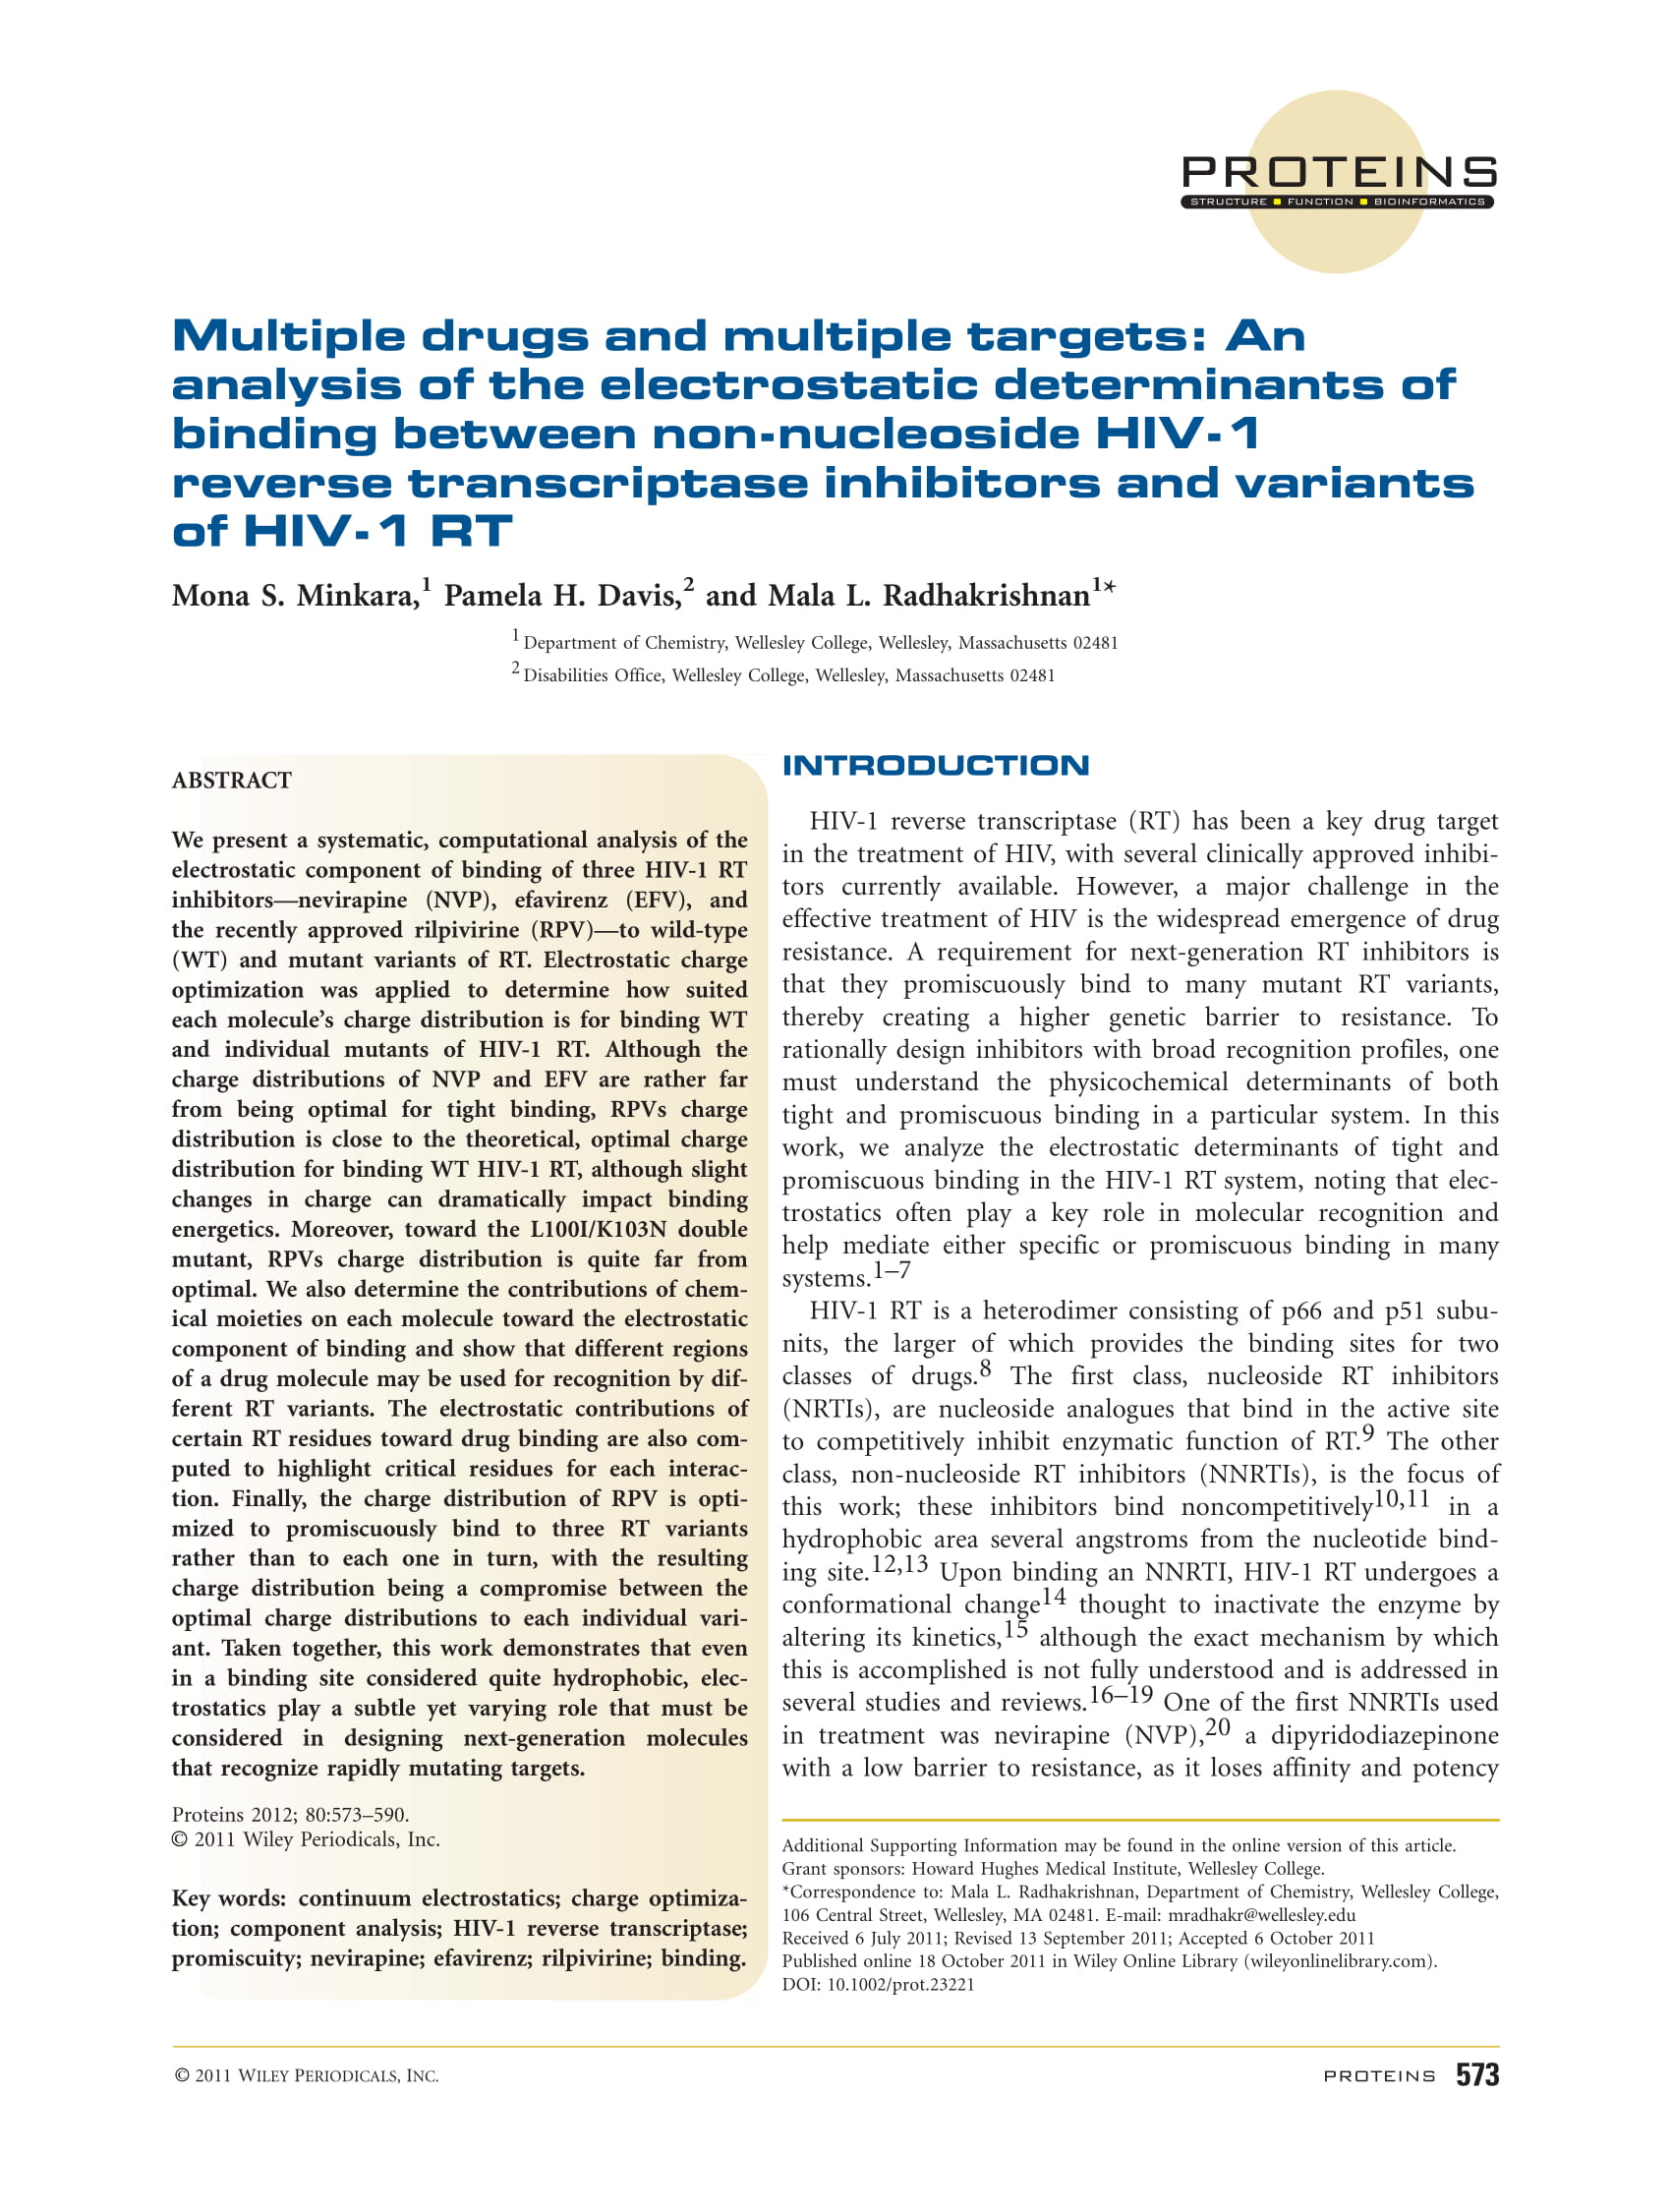 Multiple Drugs and Multiple Targets: An Analysis of the Electrostatic Determinants of Binding Between Non-nucleoside HIV-1 Reverse Transcriptase Inhibitors and Variants of HIV-1 RT